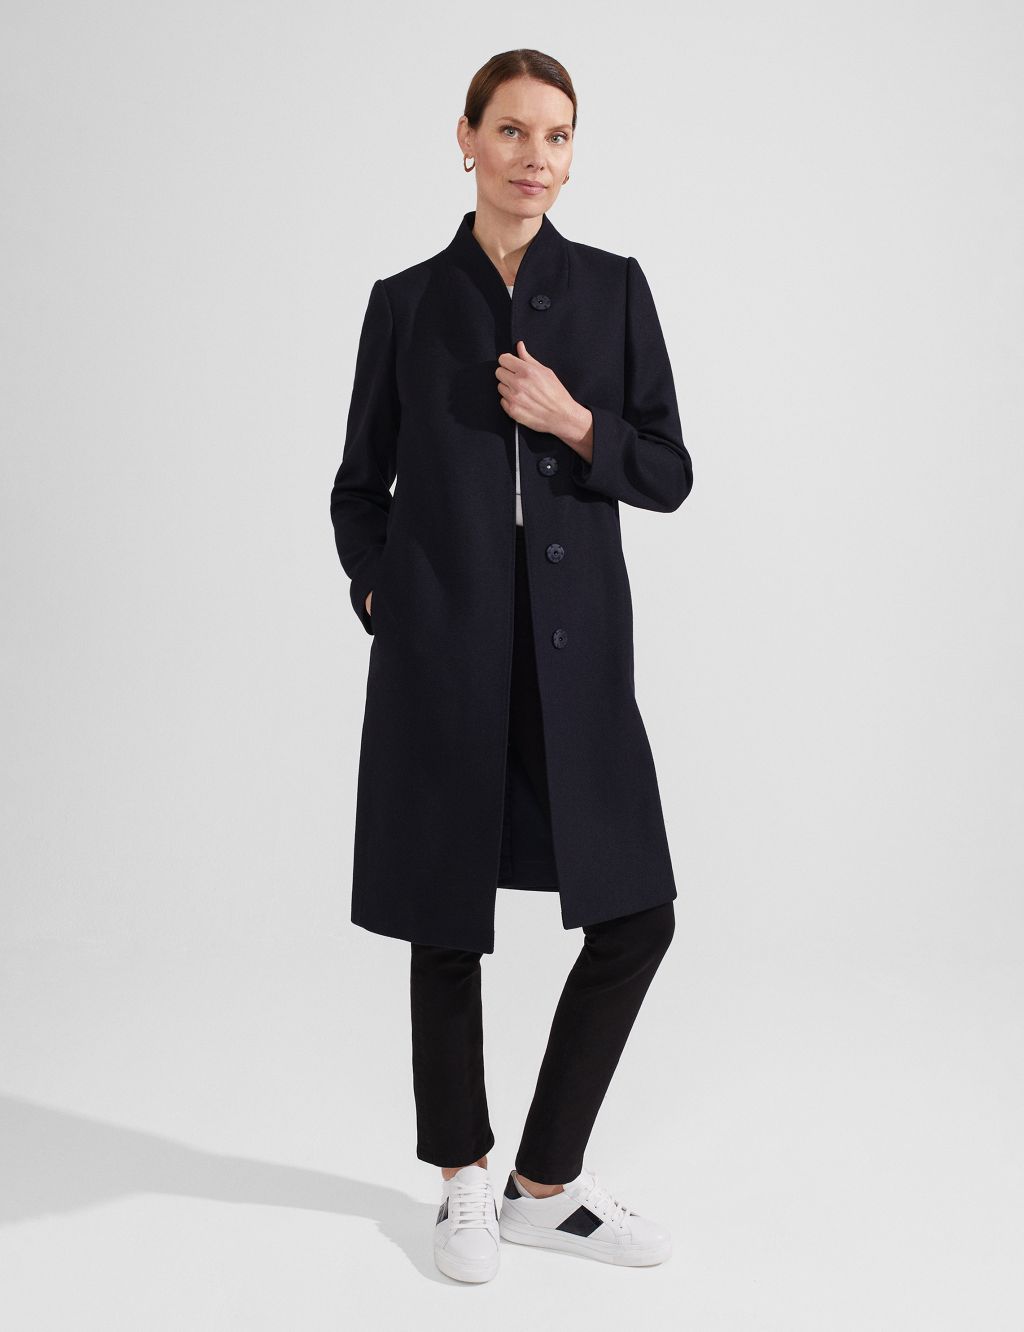 Wool Rich High Neck Tailored Coat image 1